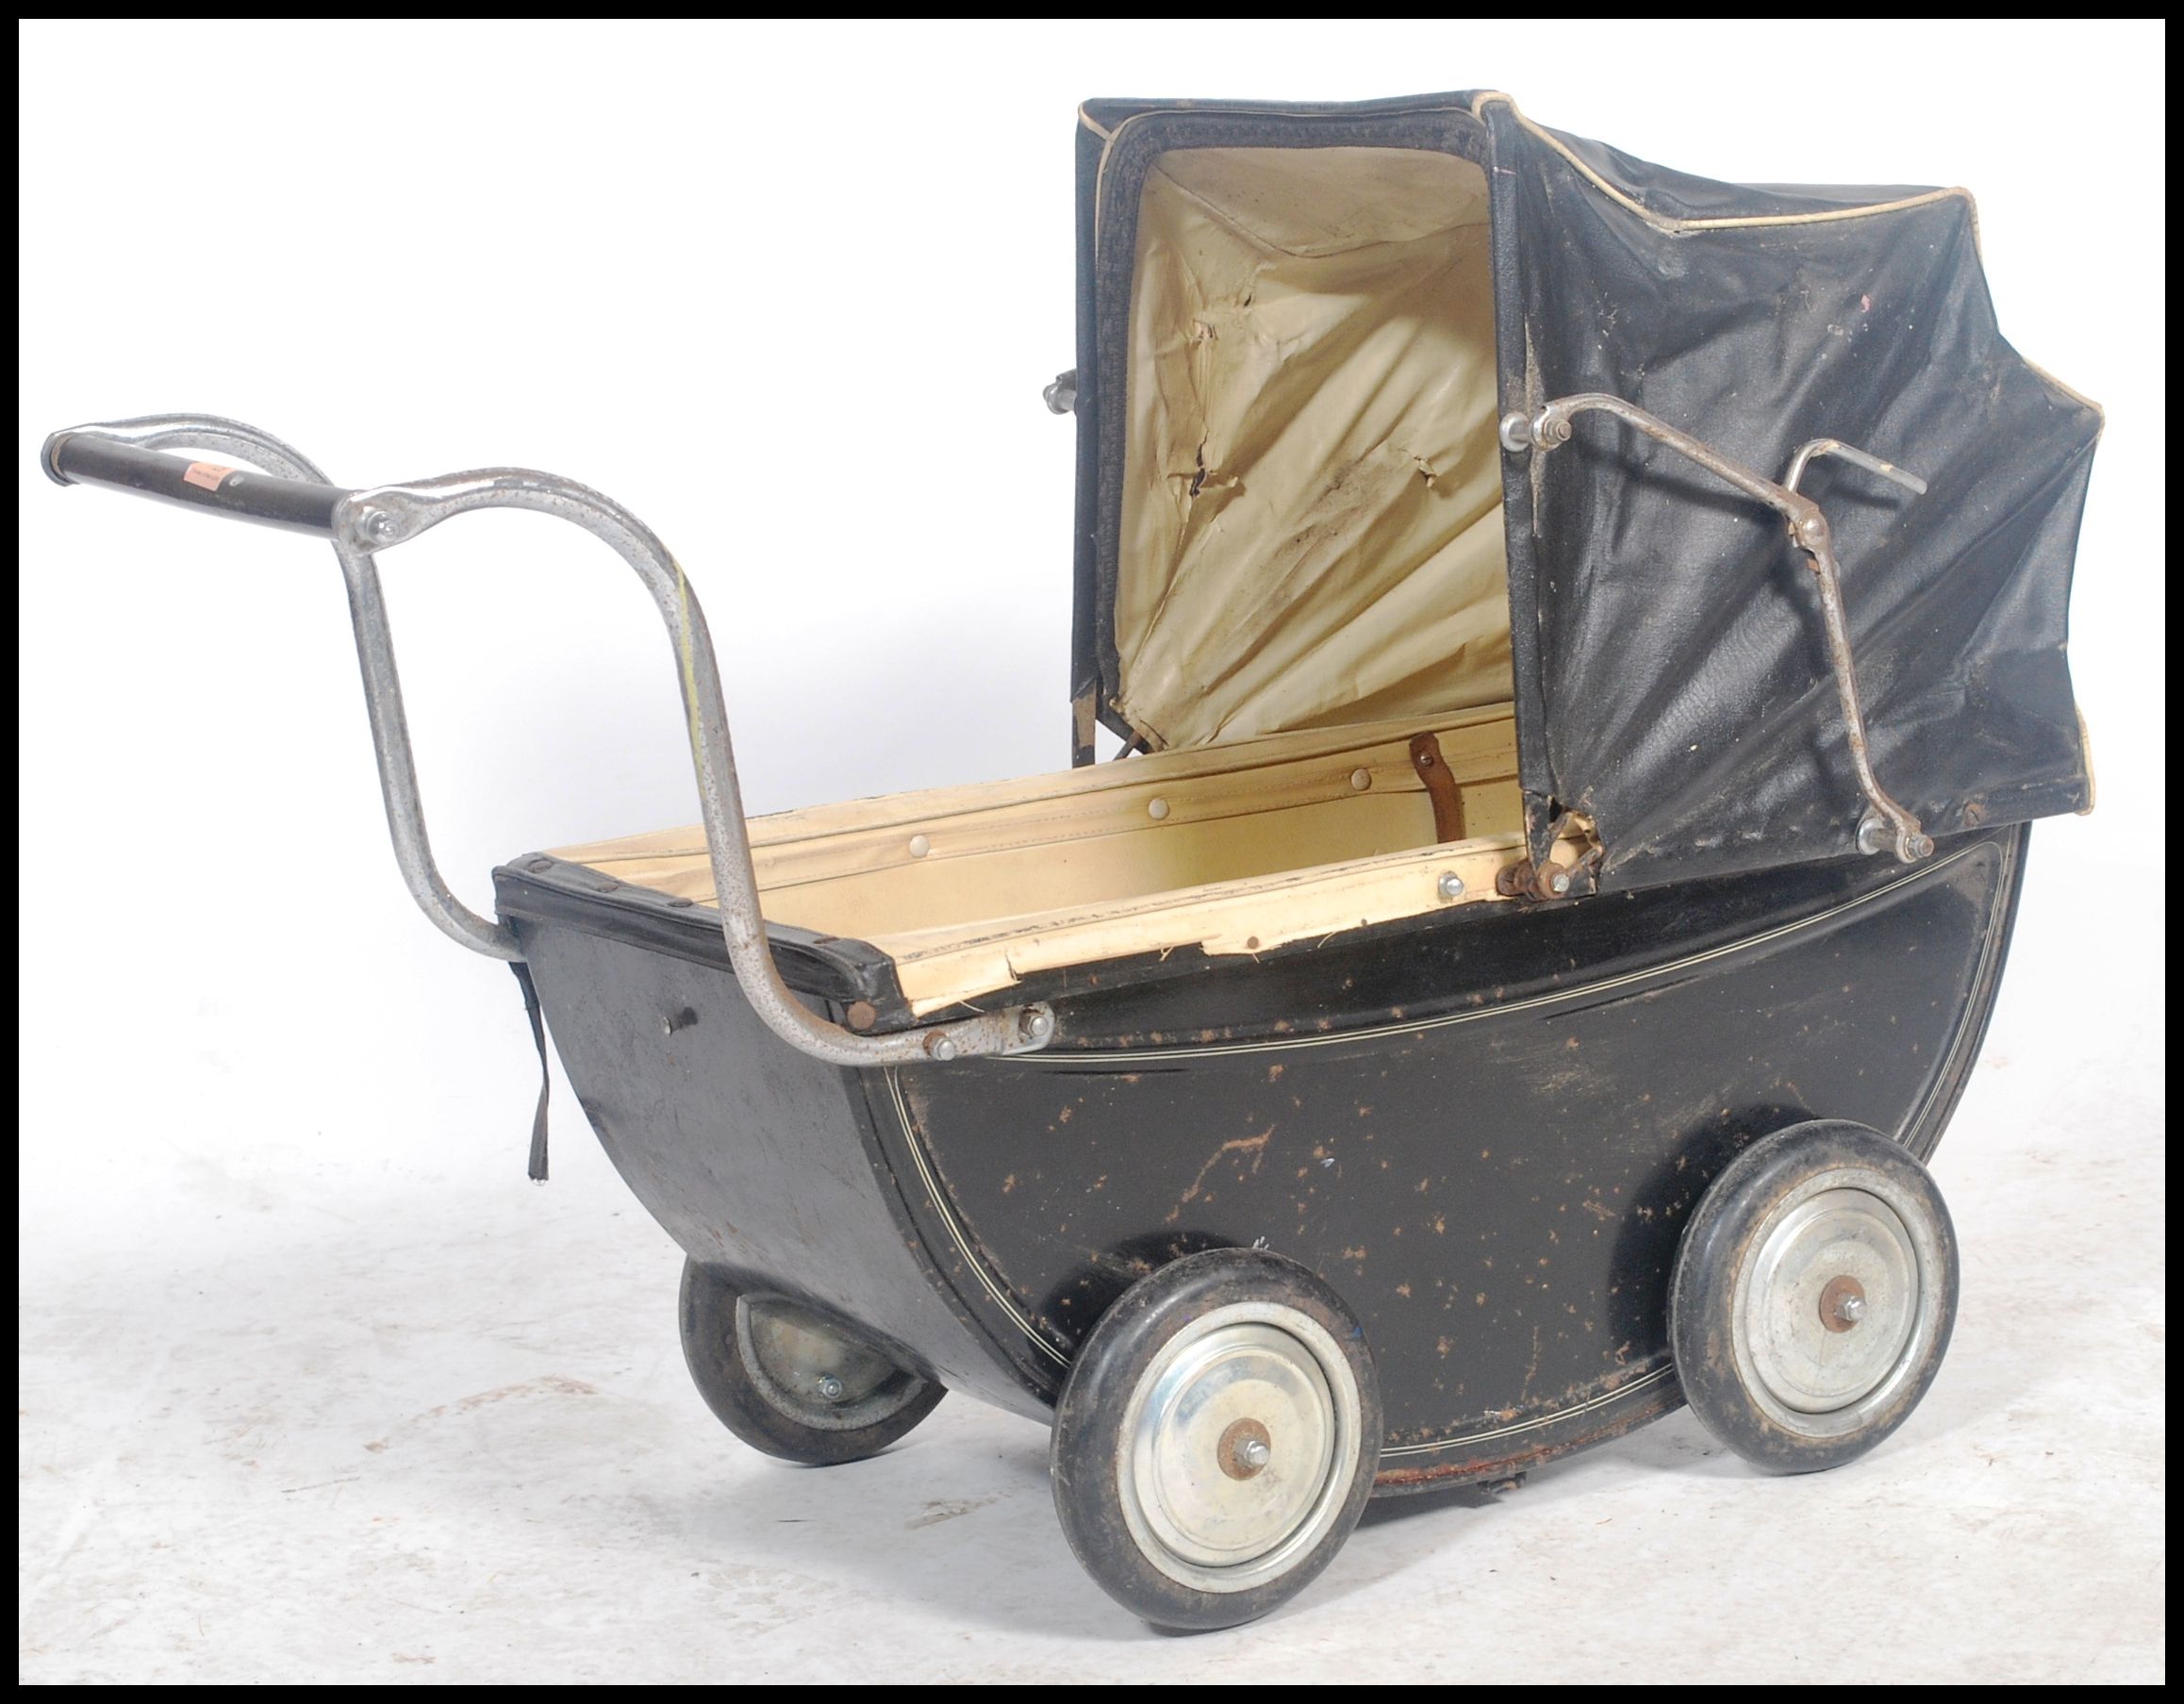 A vintage 20th century childs enamel painted pram in black with the original spoked wheels. The